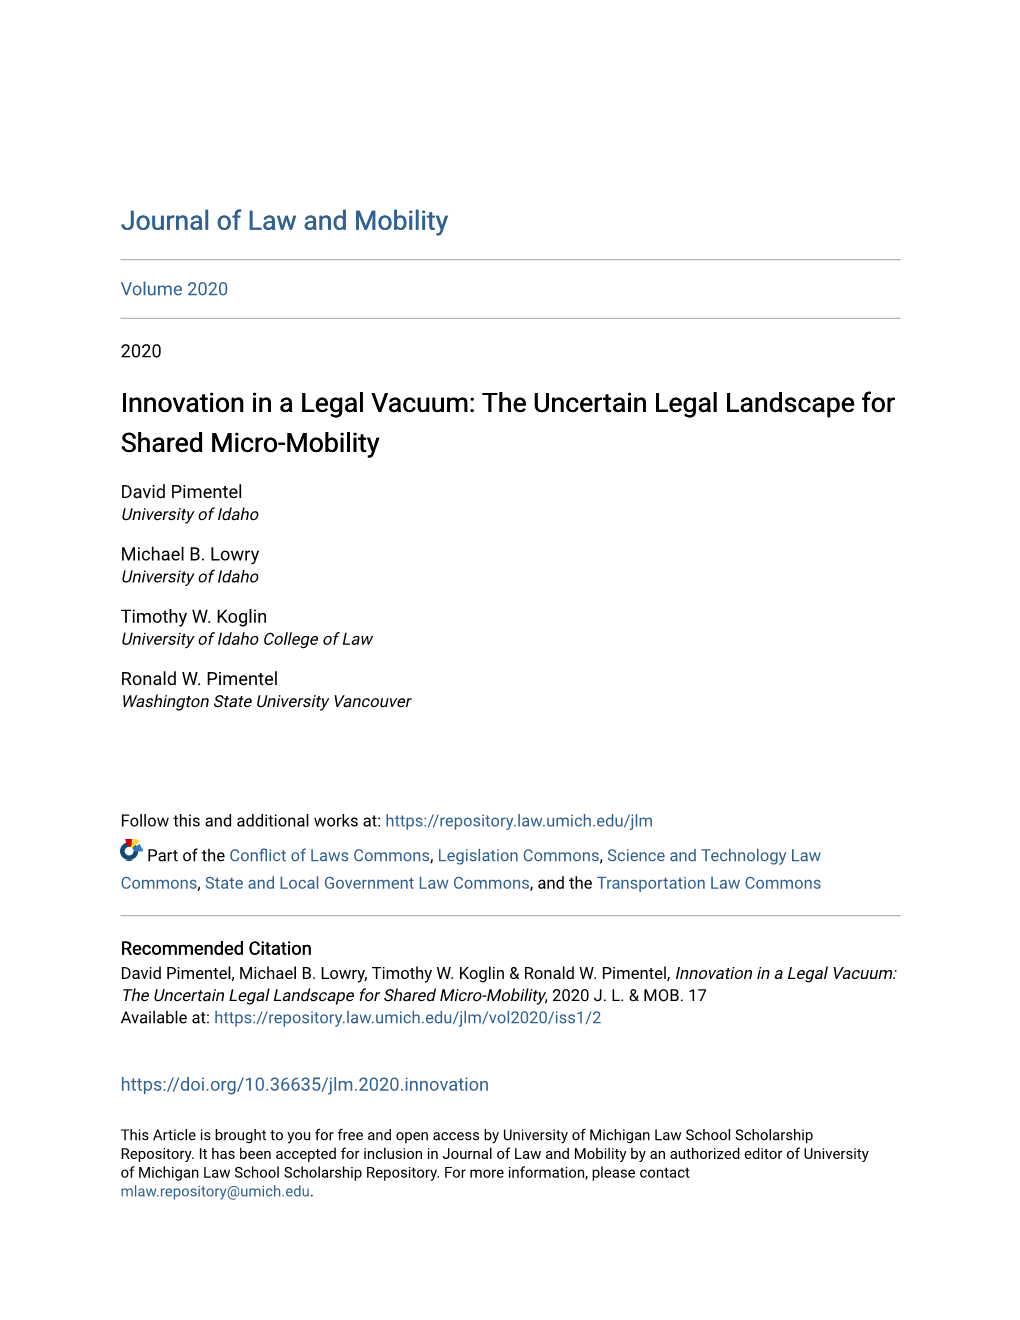 The Uncertain Legal Landscape for Shared Micro-Mobility